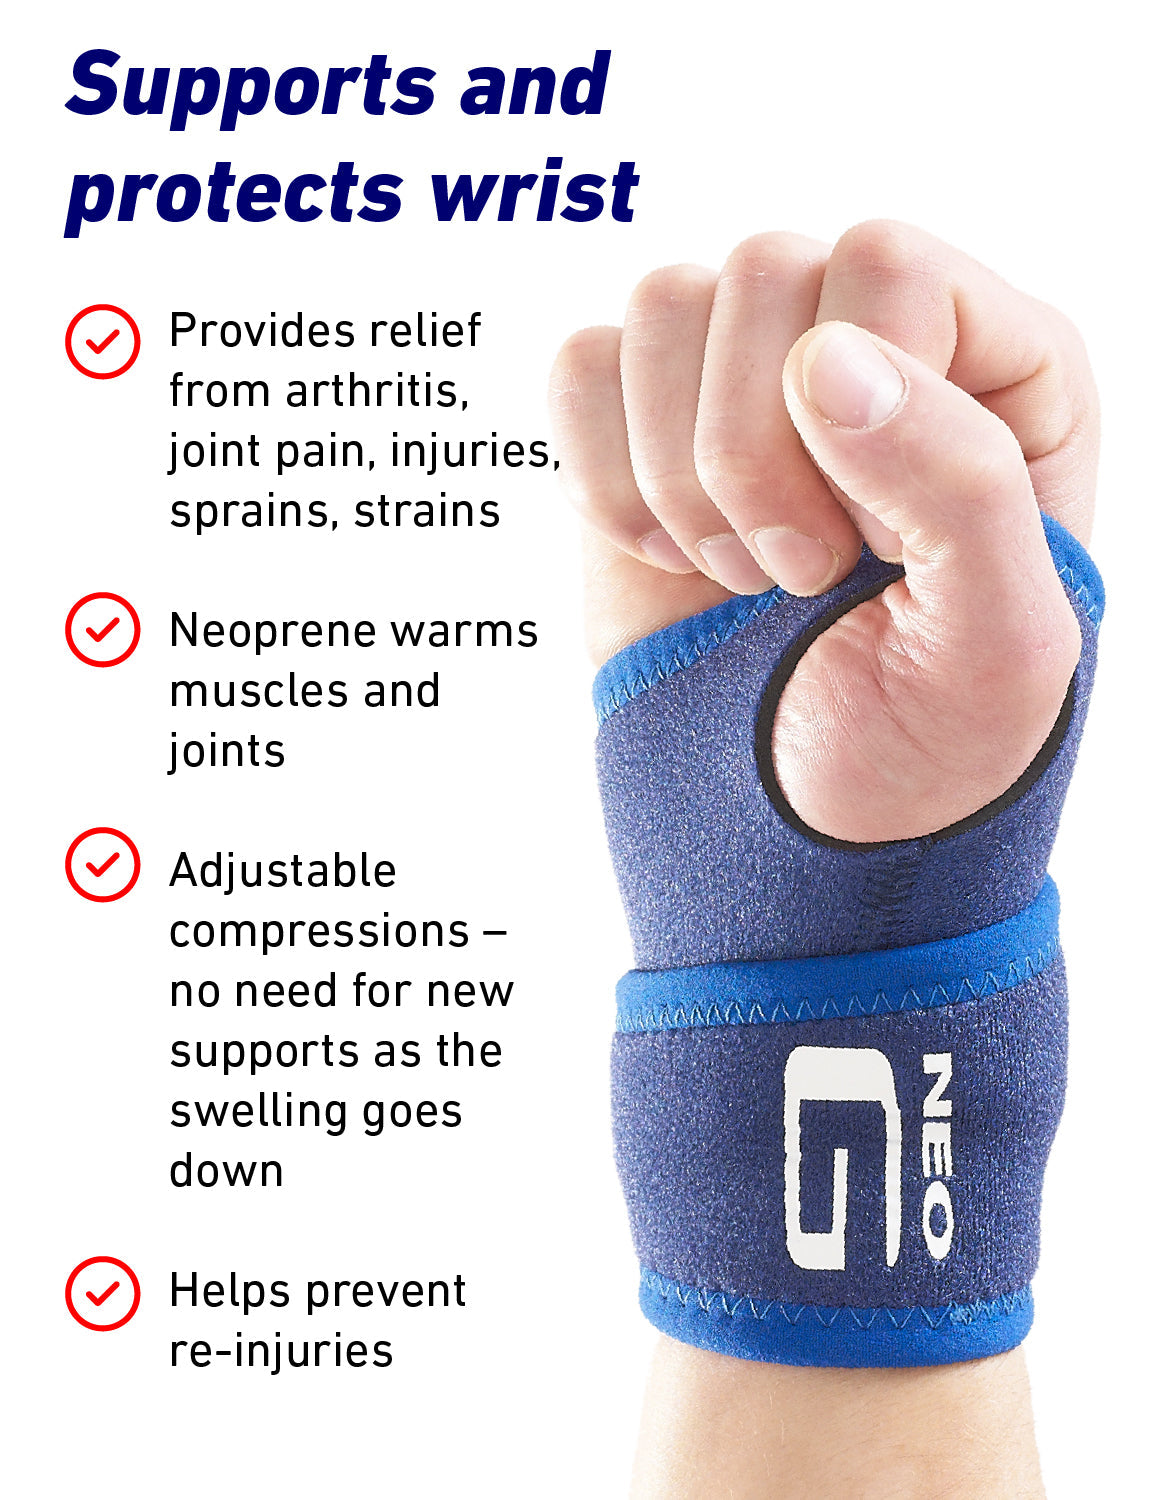 Adjustable Wrist Support, Adjustable, Provides Support & Compression to  Arthritic and Painful Wrist Joints